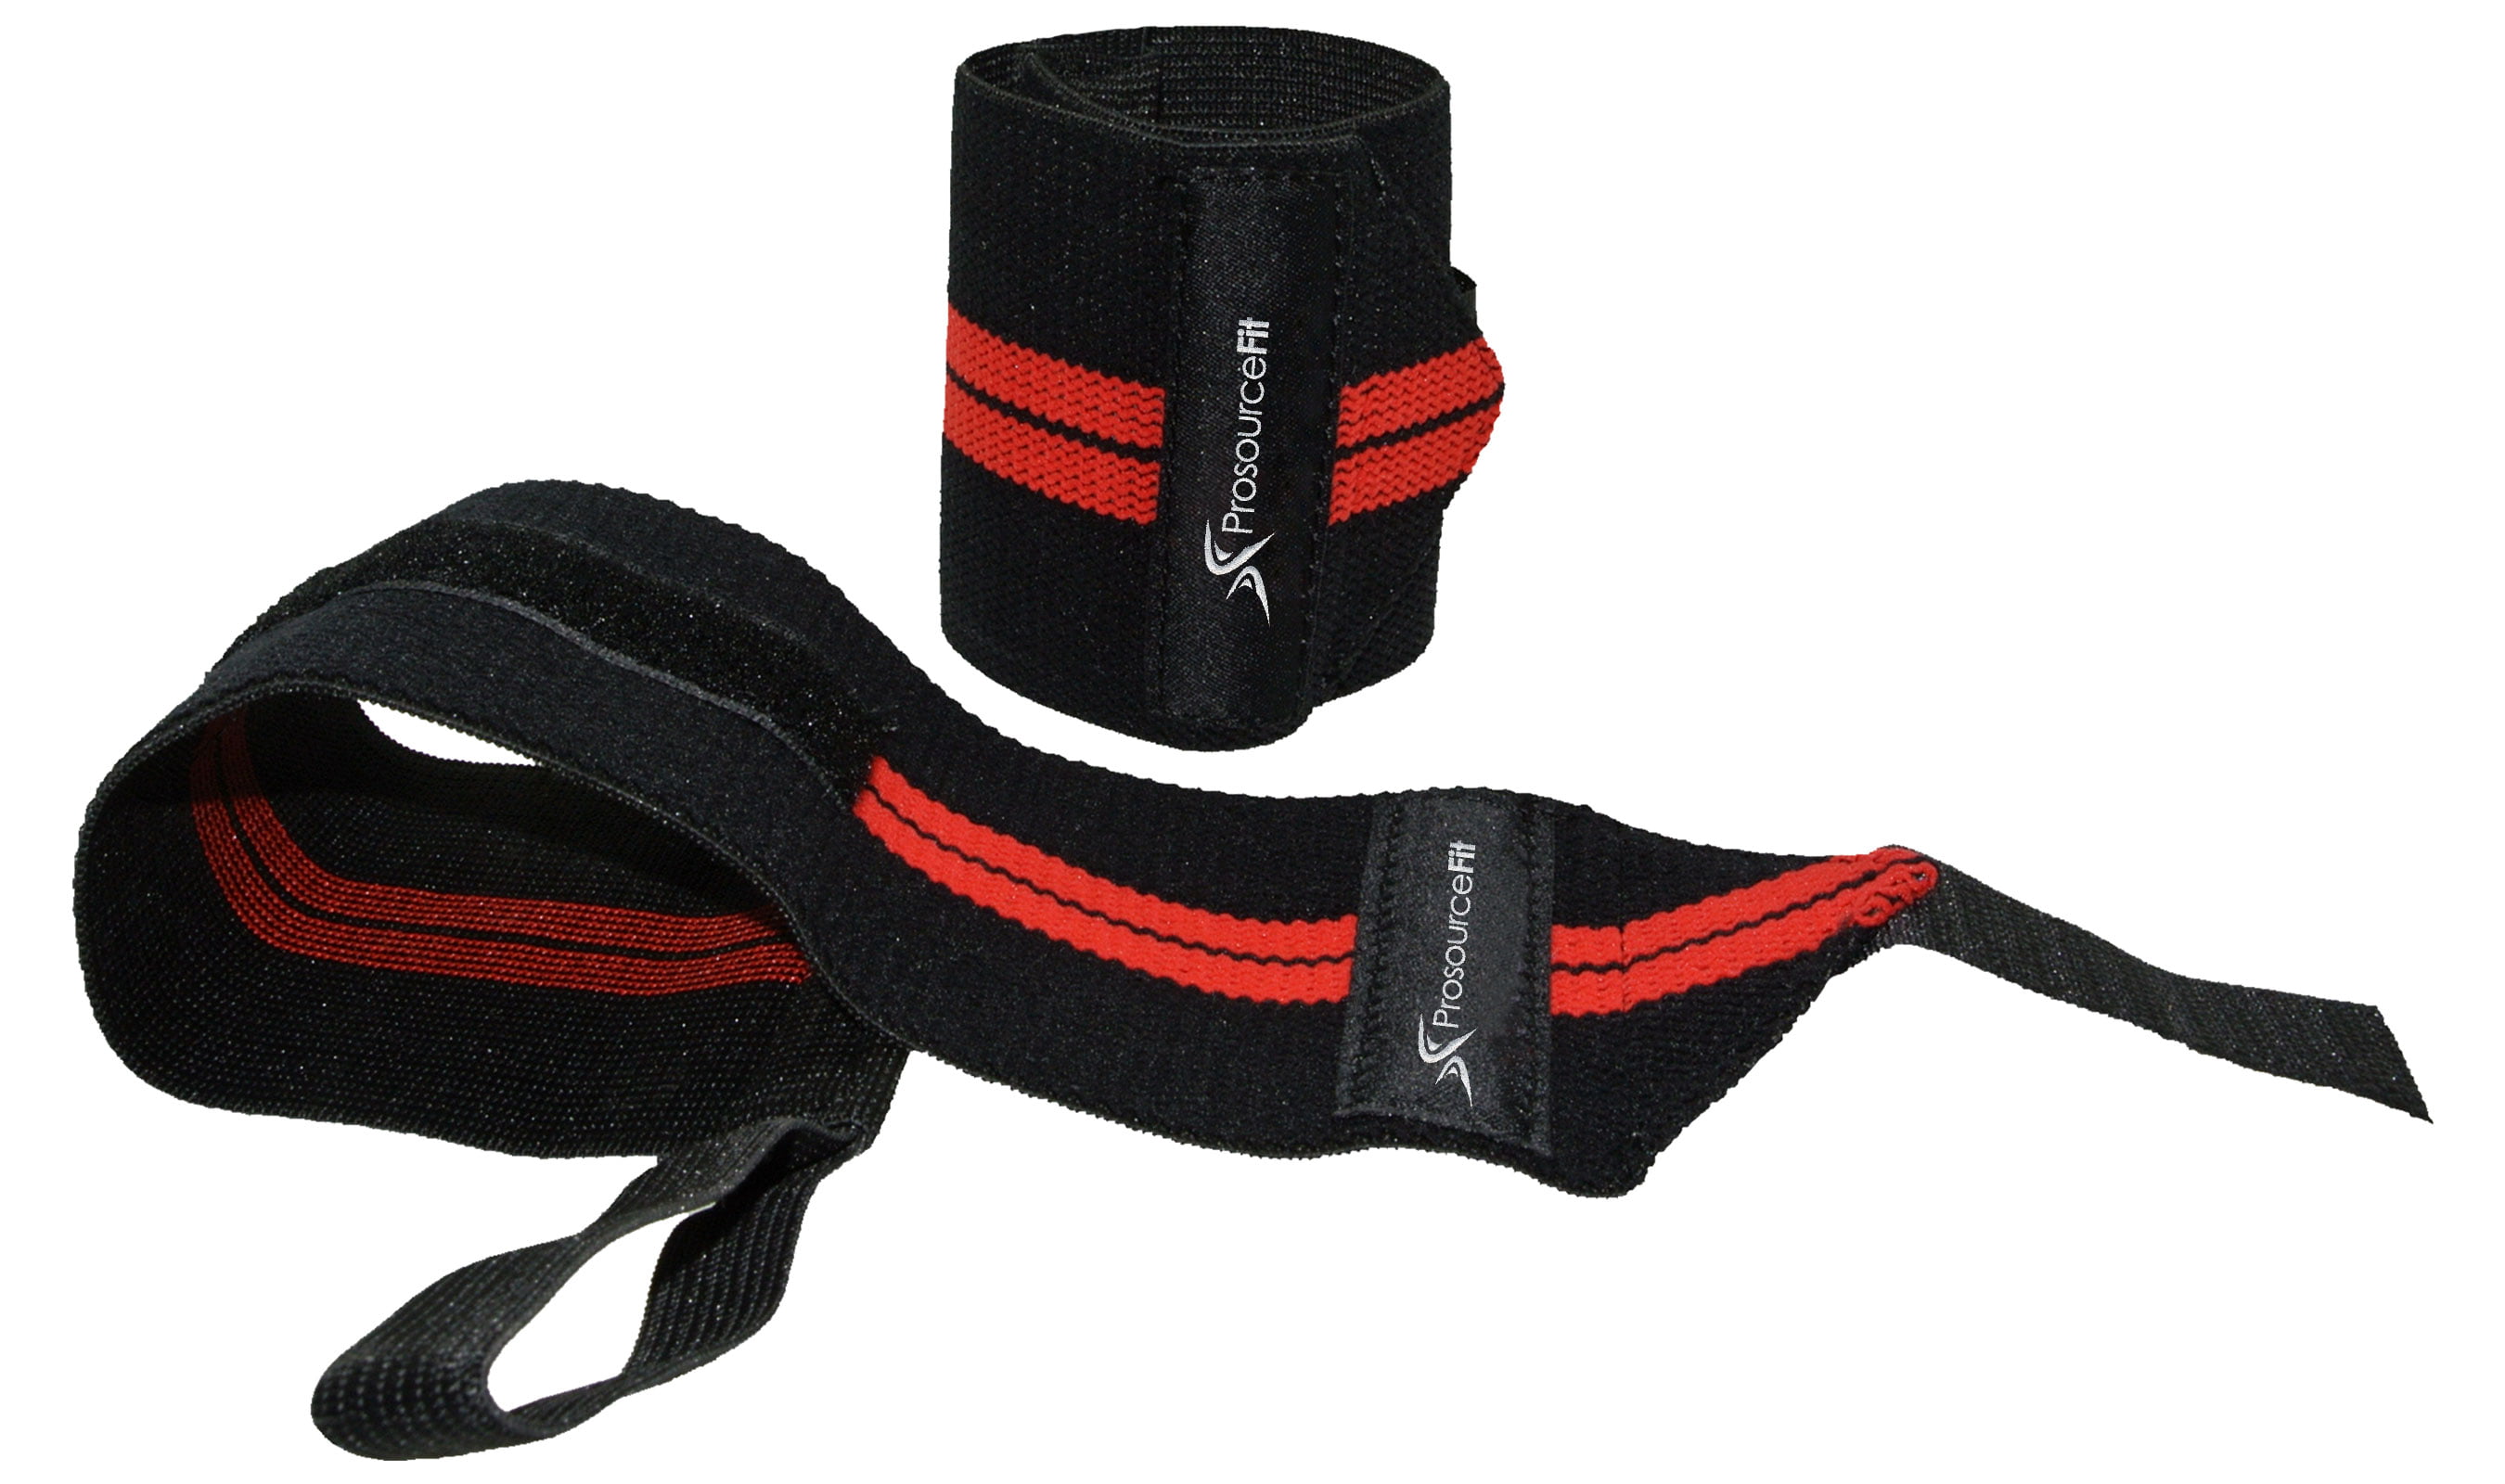 WEIGHT LIFTING STRAPS PADDED GYM WRIST HAND BAR SUPPORT SINGLE LOOP RED 